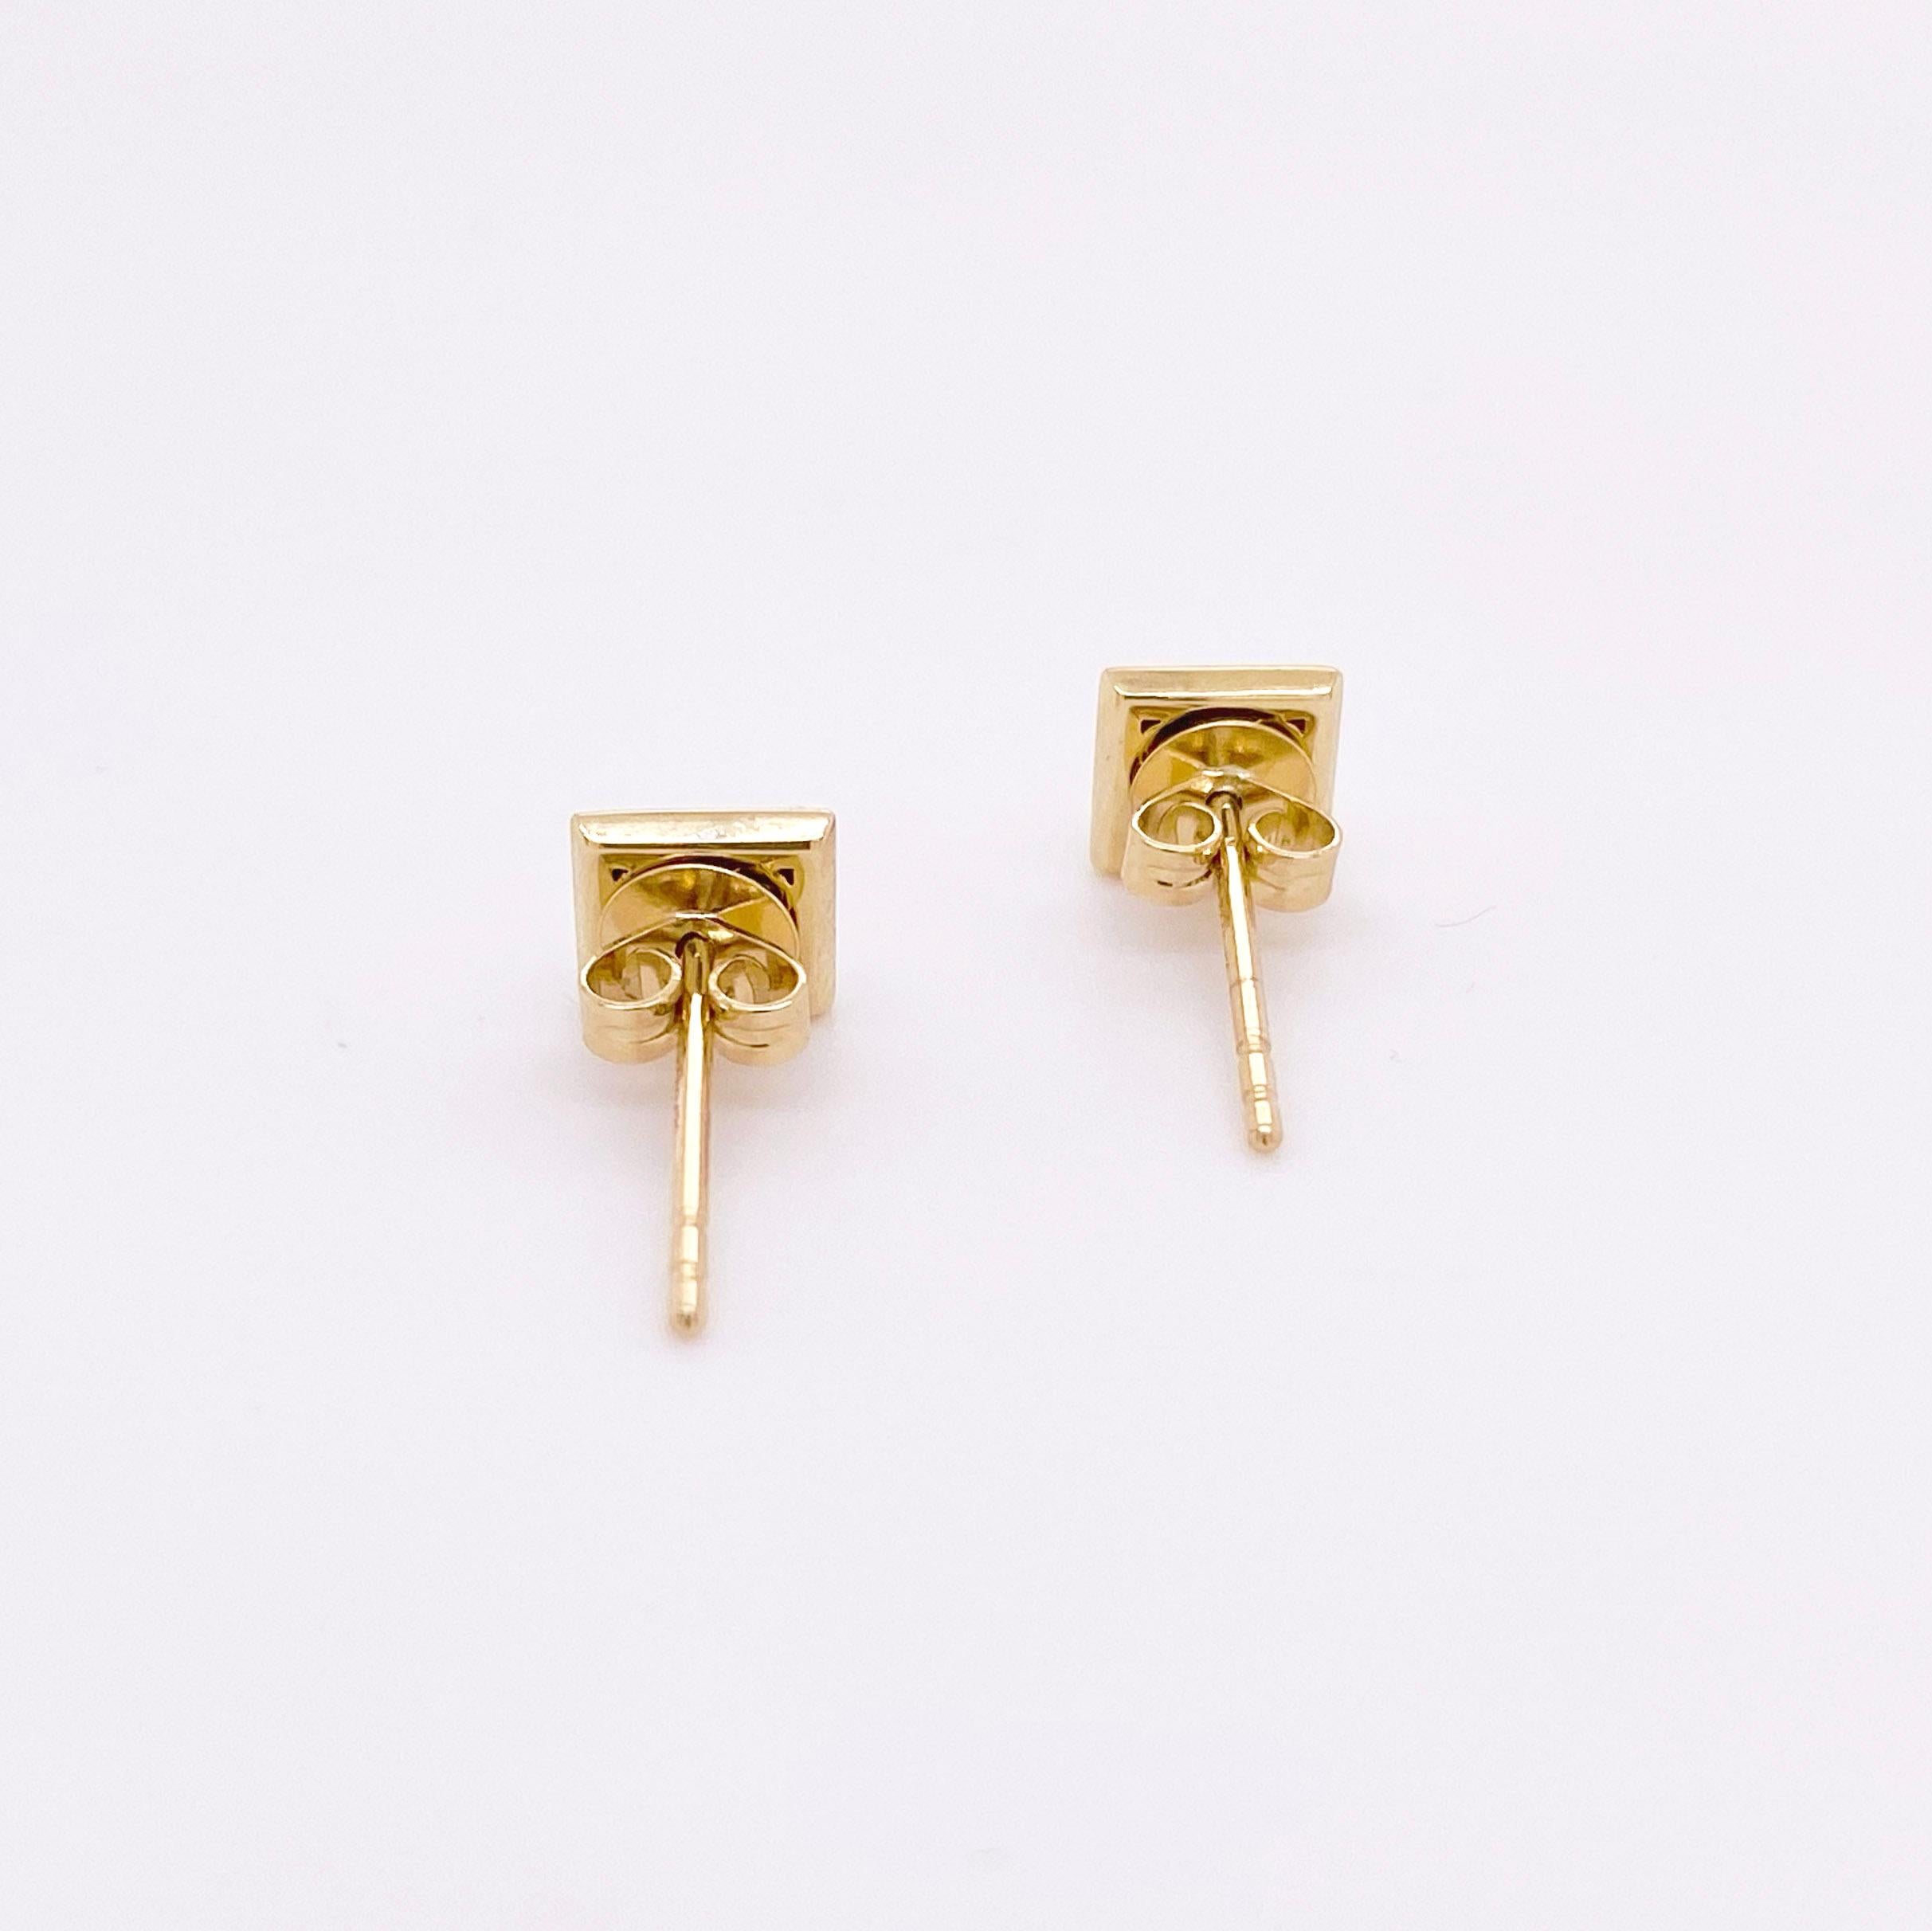 Square Pyramid Earrings, 14 Karat Yellow Gold Pyramid Stud Earrings, Post Square For Sale 2